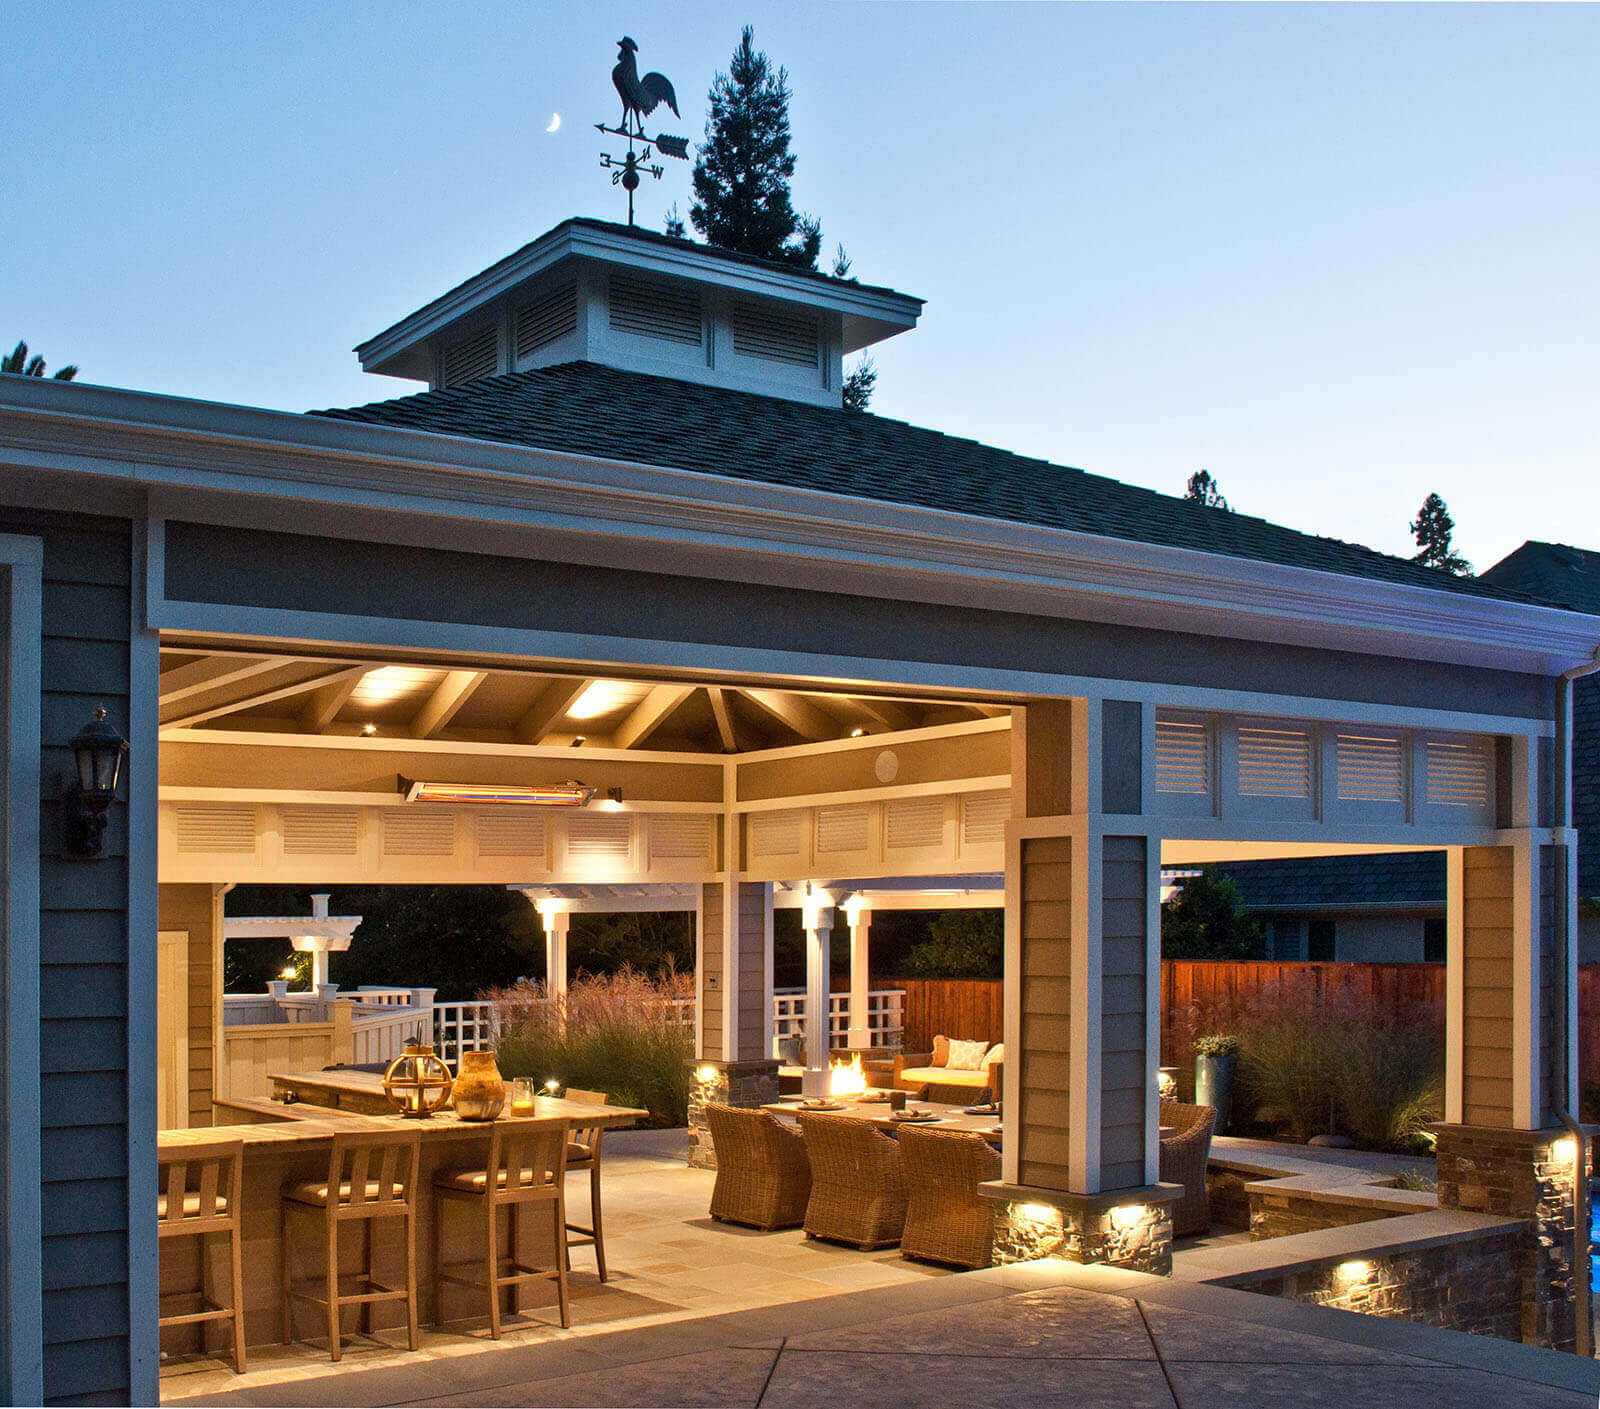 Warm ambient lighting for covered outdoor veranda, with light fixtures at base of columns